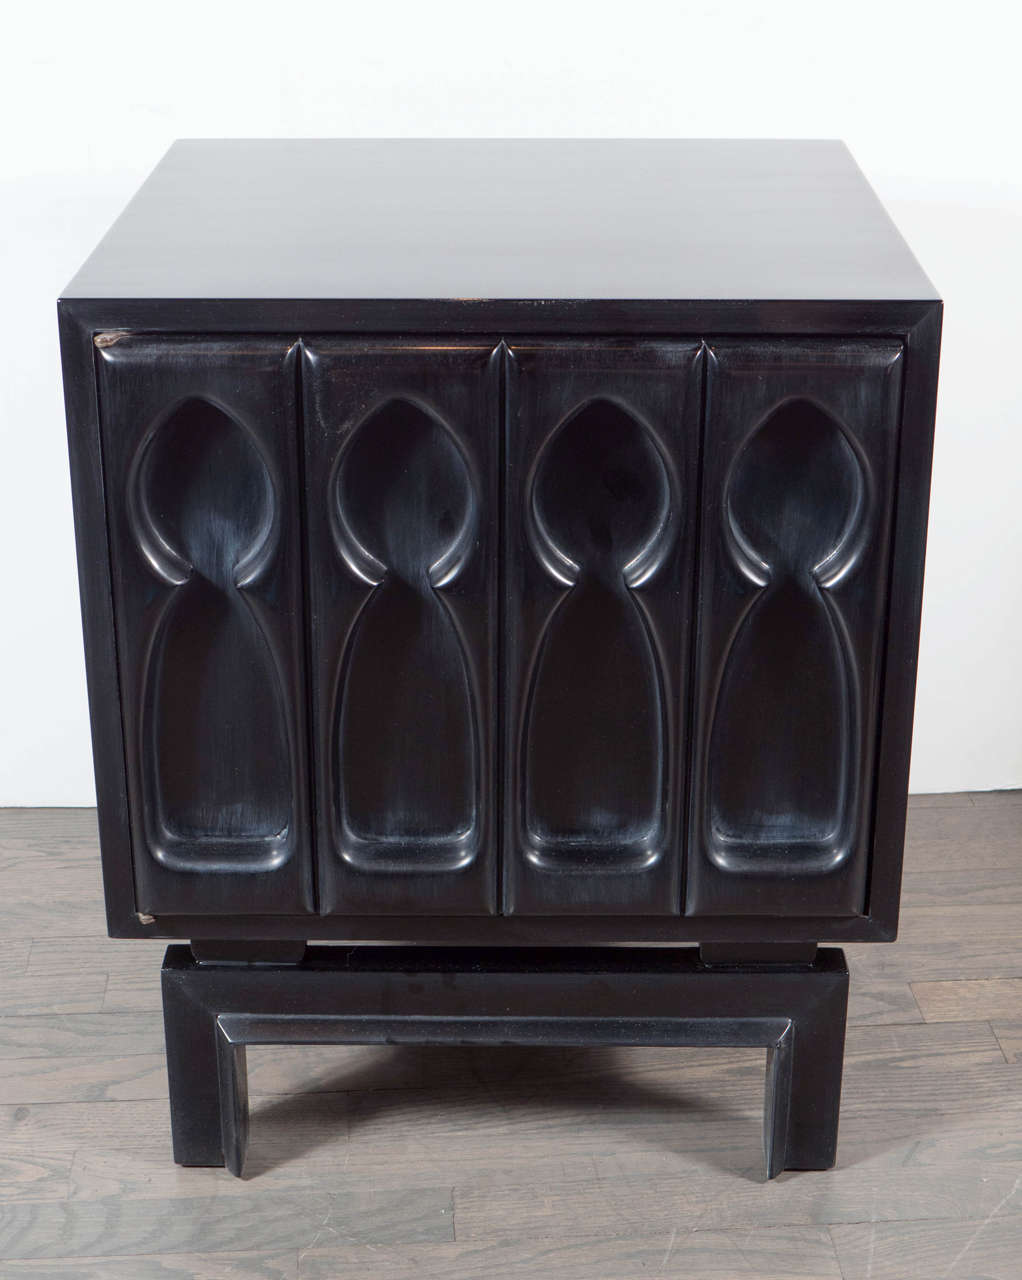 This ultra chic pair of Mid-Century Modernist sculptural front end tables or nightstands are very sophisticated. They feature a beautiful relief front of sculptural design in hand rubbed ebonized walnut. The door opens to reveal a cabinet with a